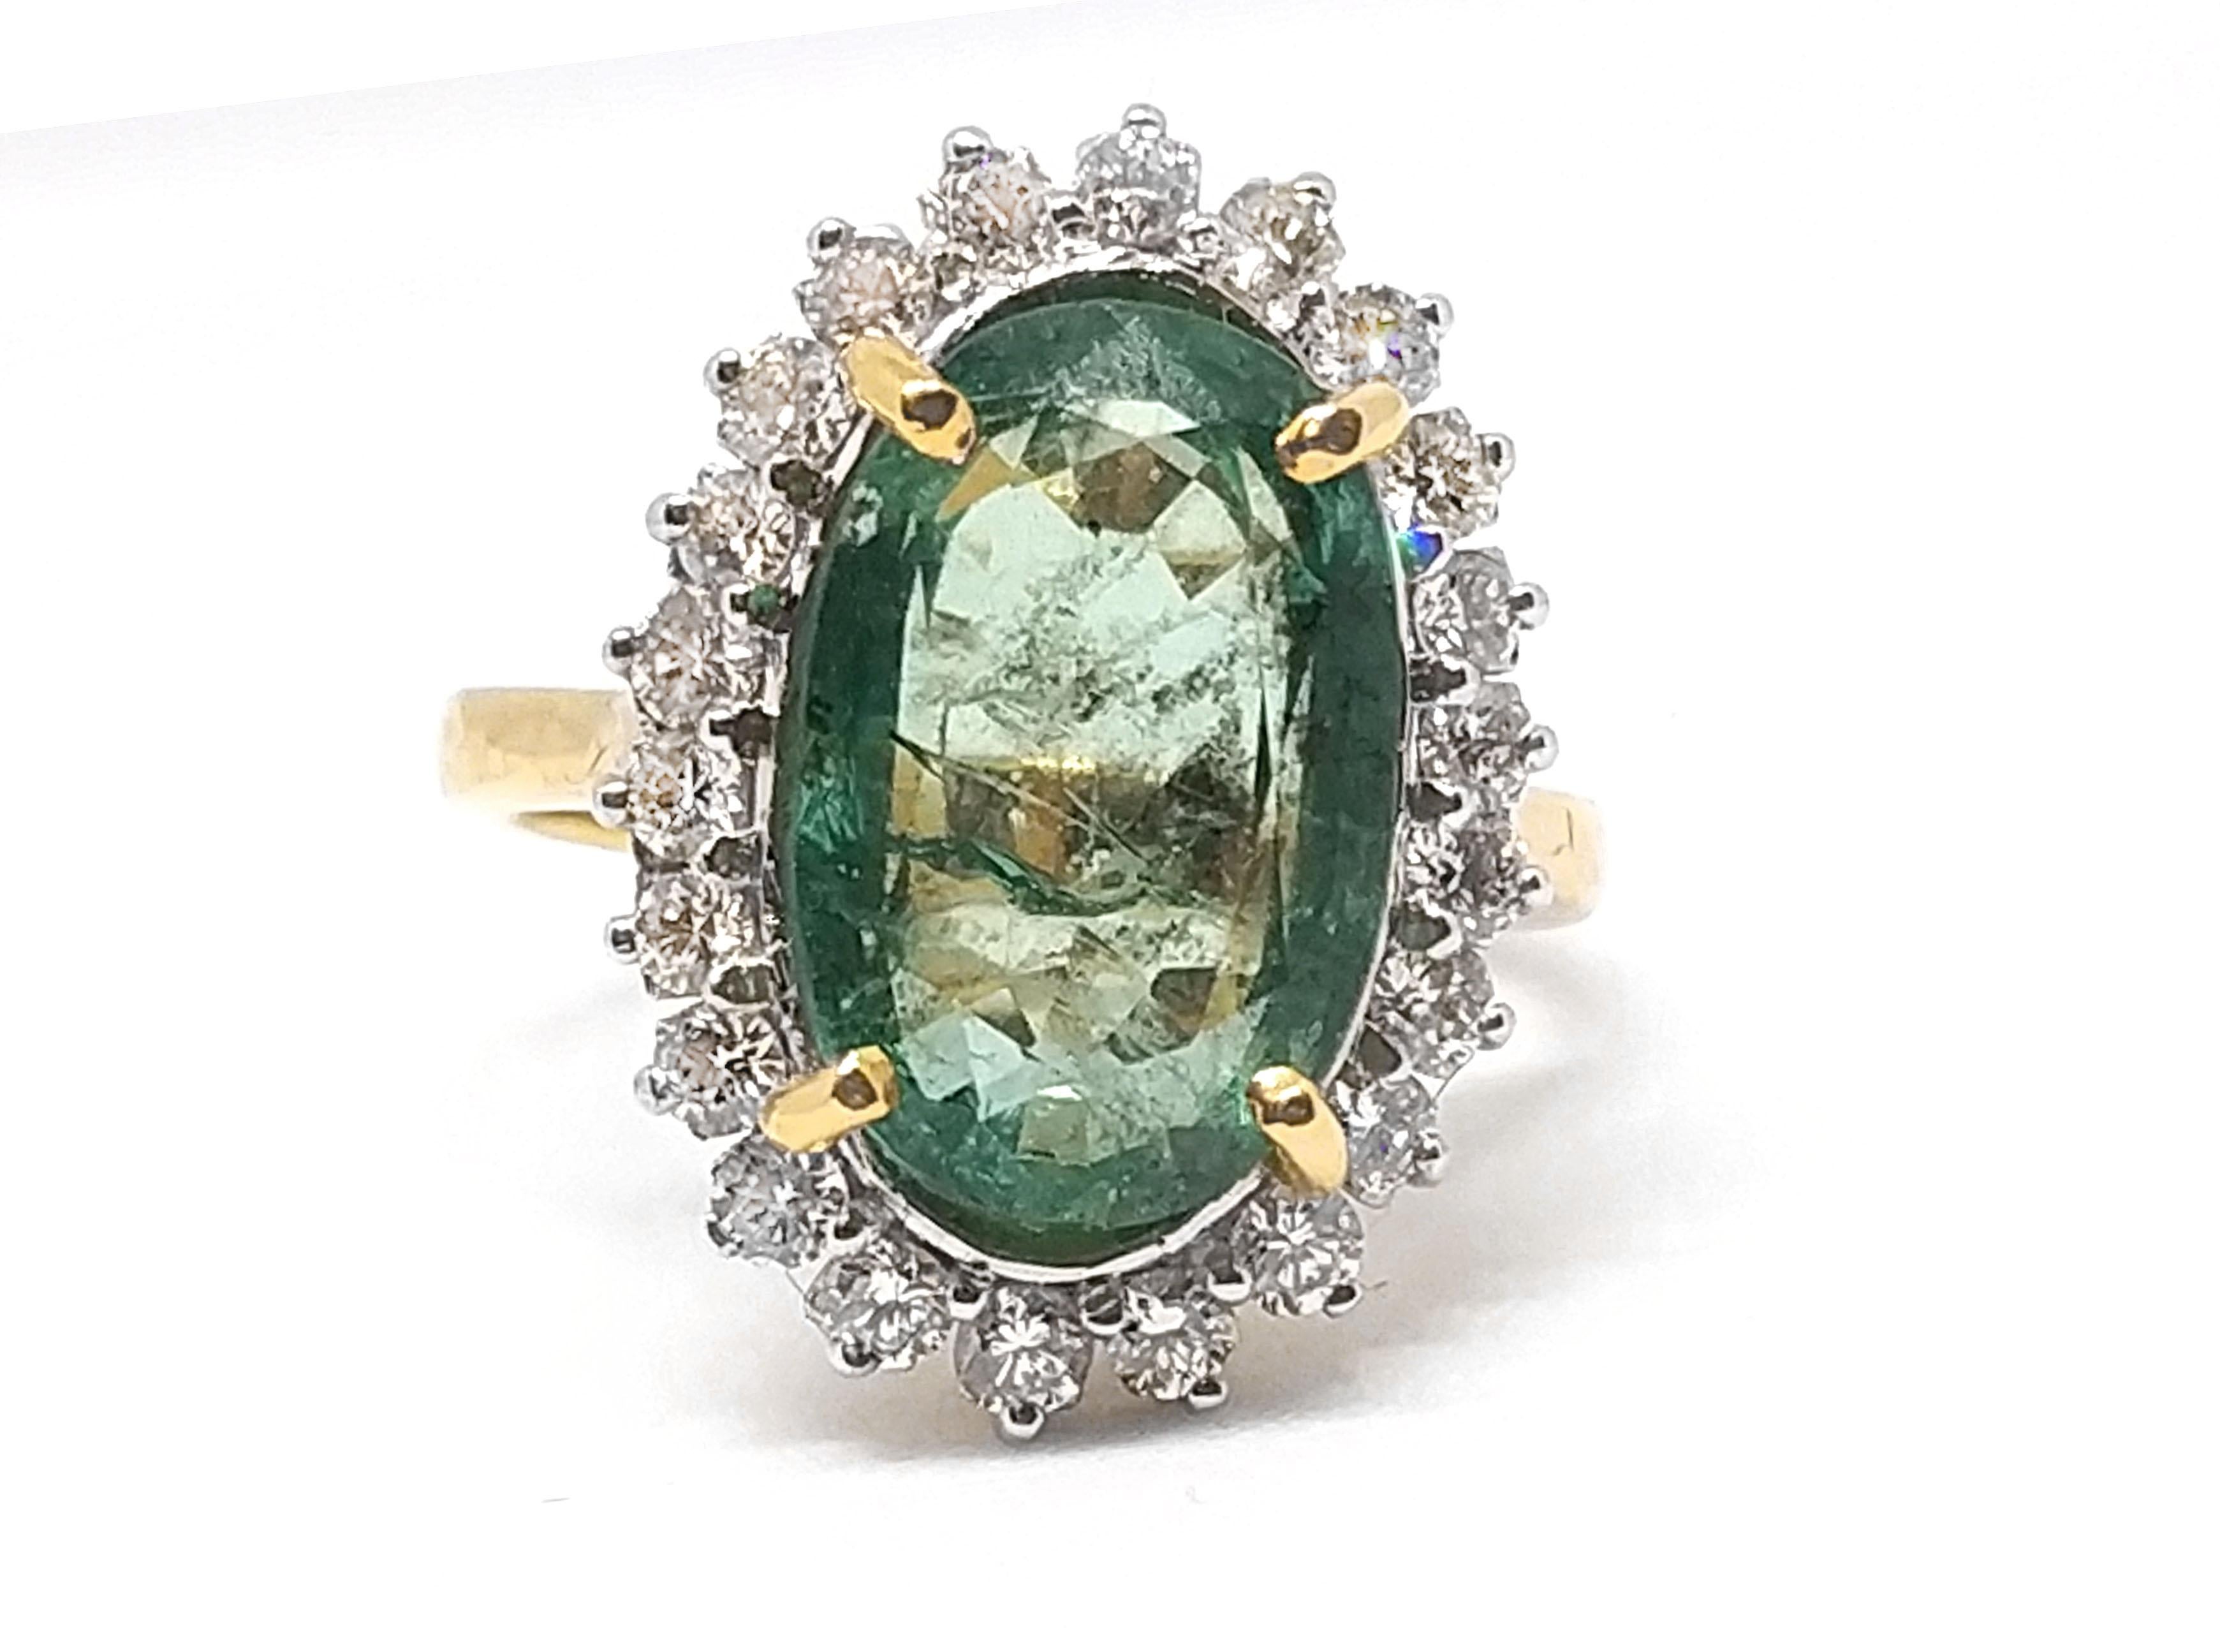 Most beautiful emerald and diamond ring
8.5 carat certified emerald and
1.45 carat eye clean diamonds
in 18 carat yellow gold